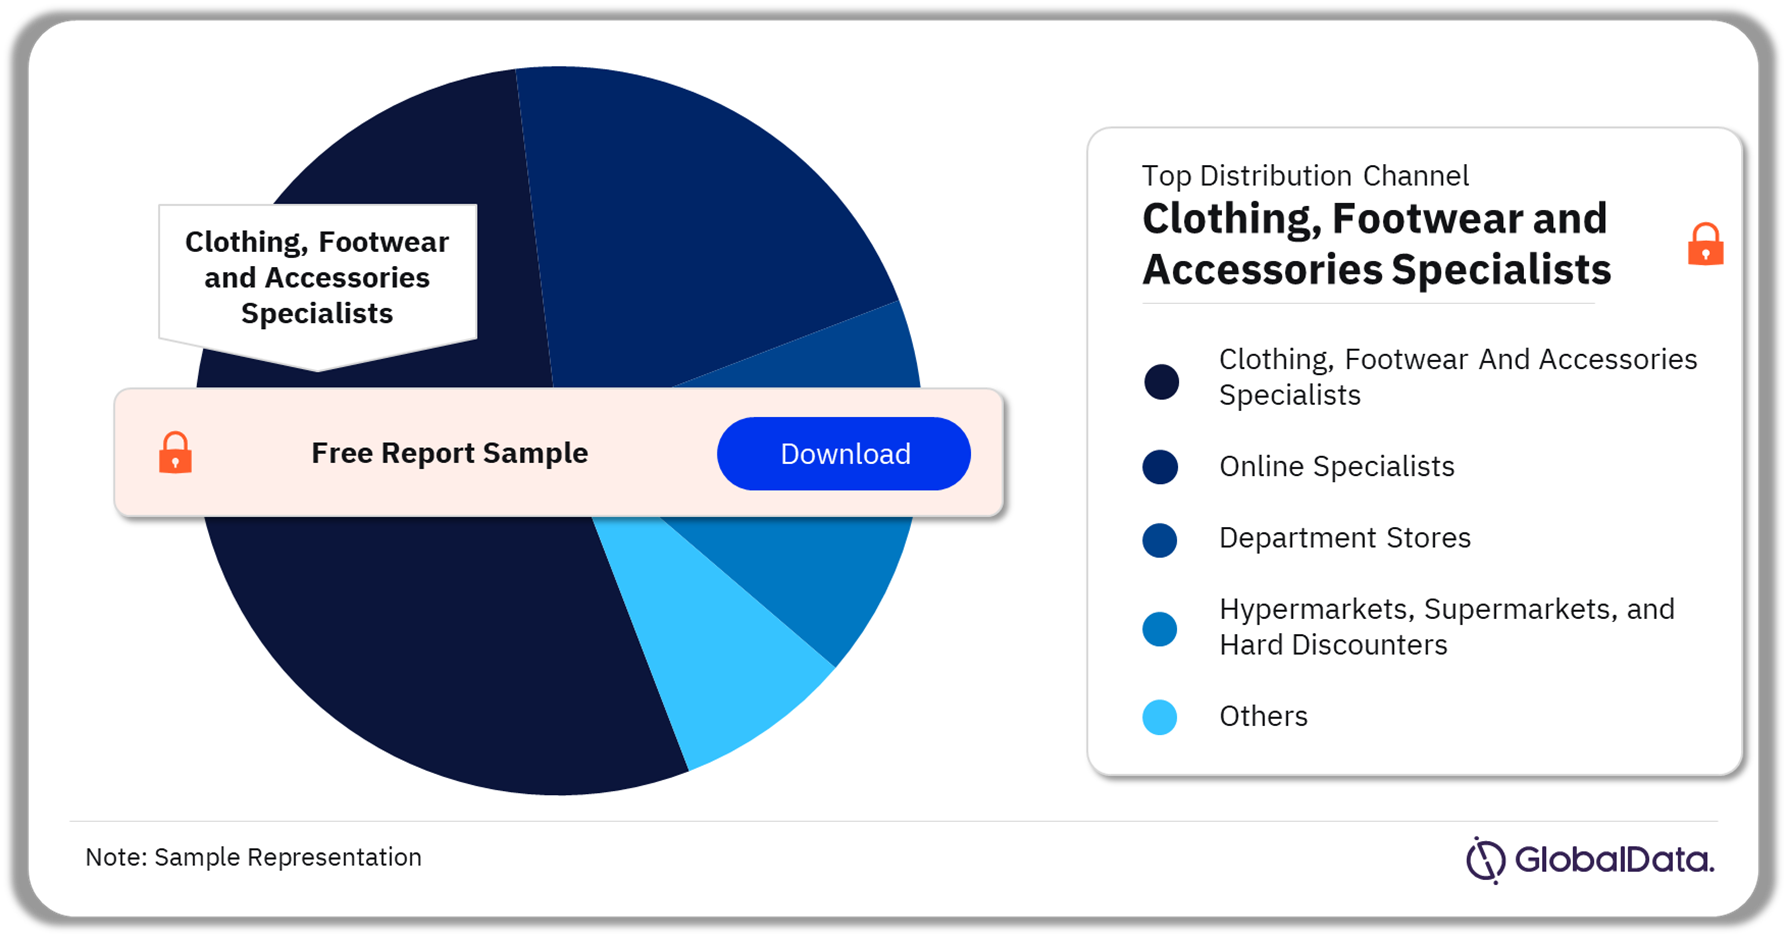 Europe Apparel Market Analysis by Distribution Channel, 2022 (%)